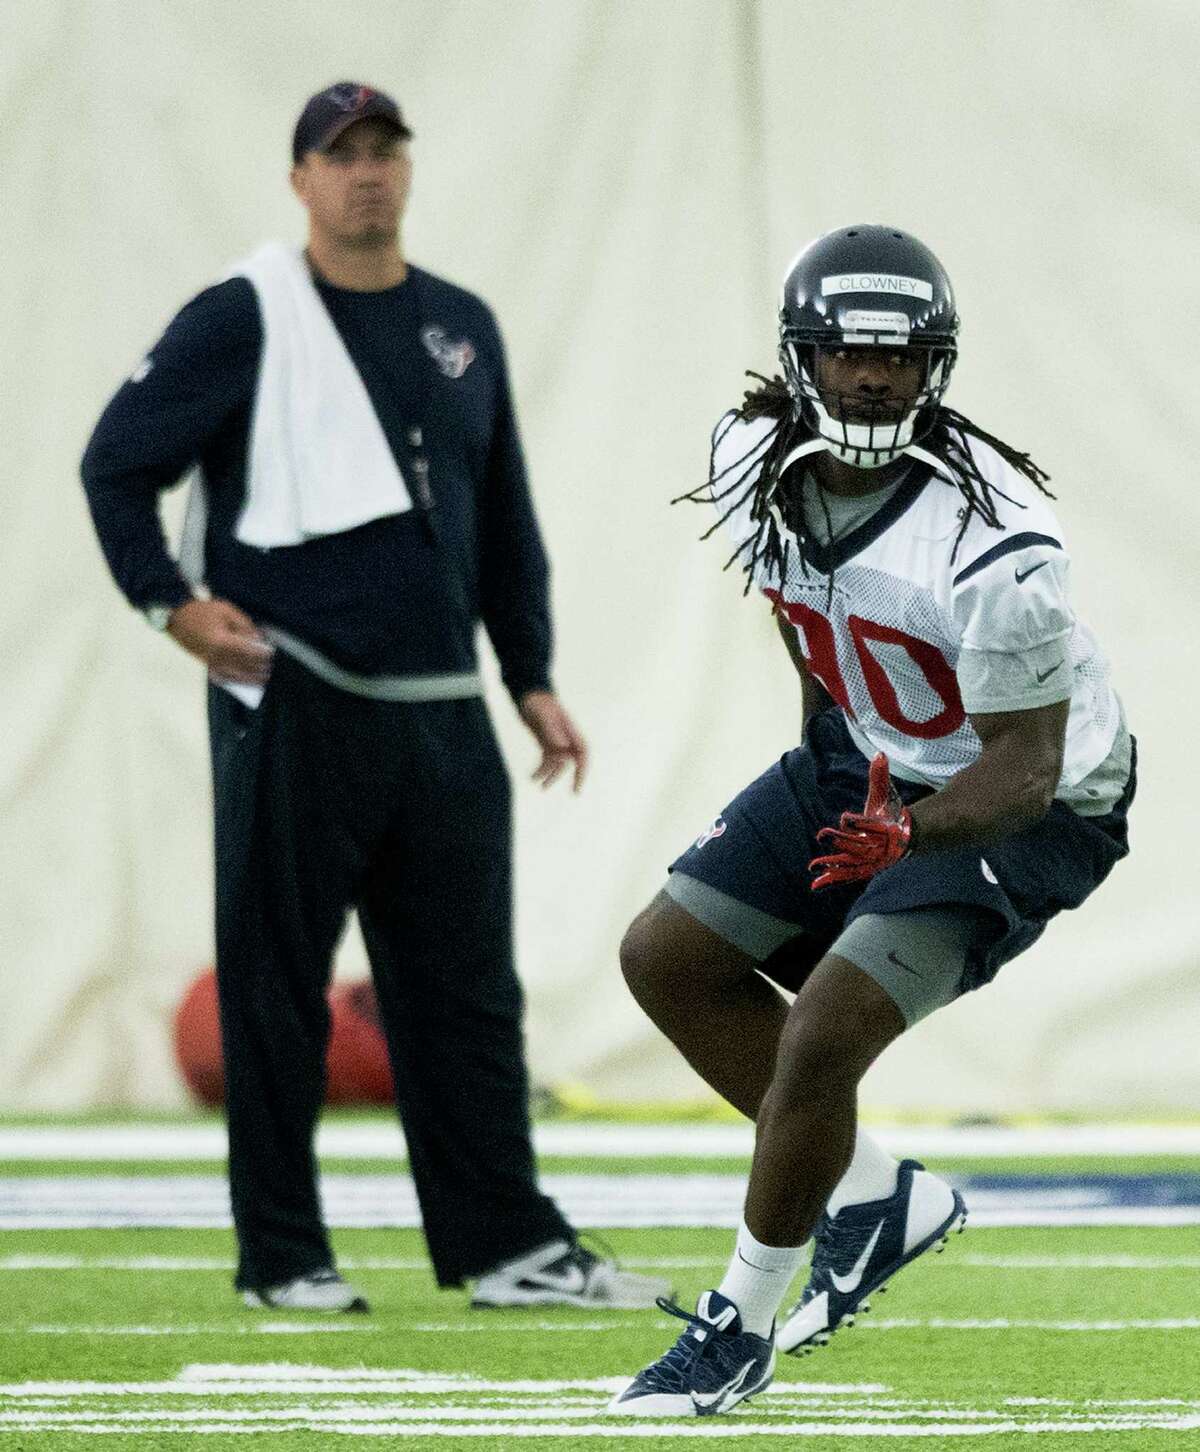 Texans linebacker Jadeveon Clowney, the top pick of the 2014 NFL draft, might miss the start of training camp while recovering from sports hernia surgery.